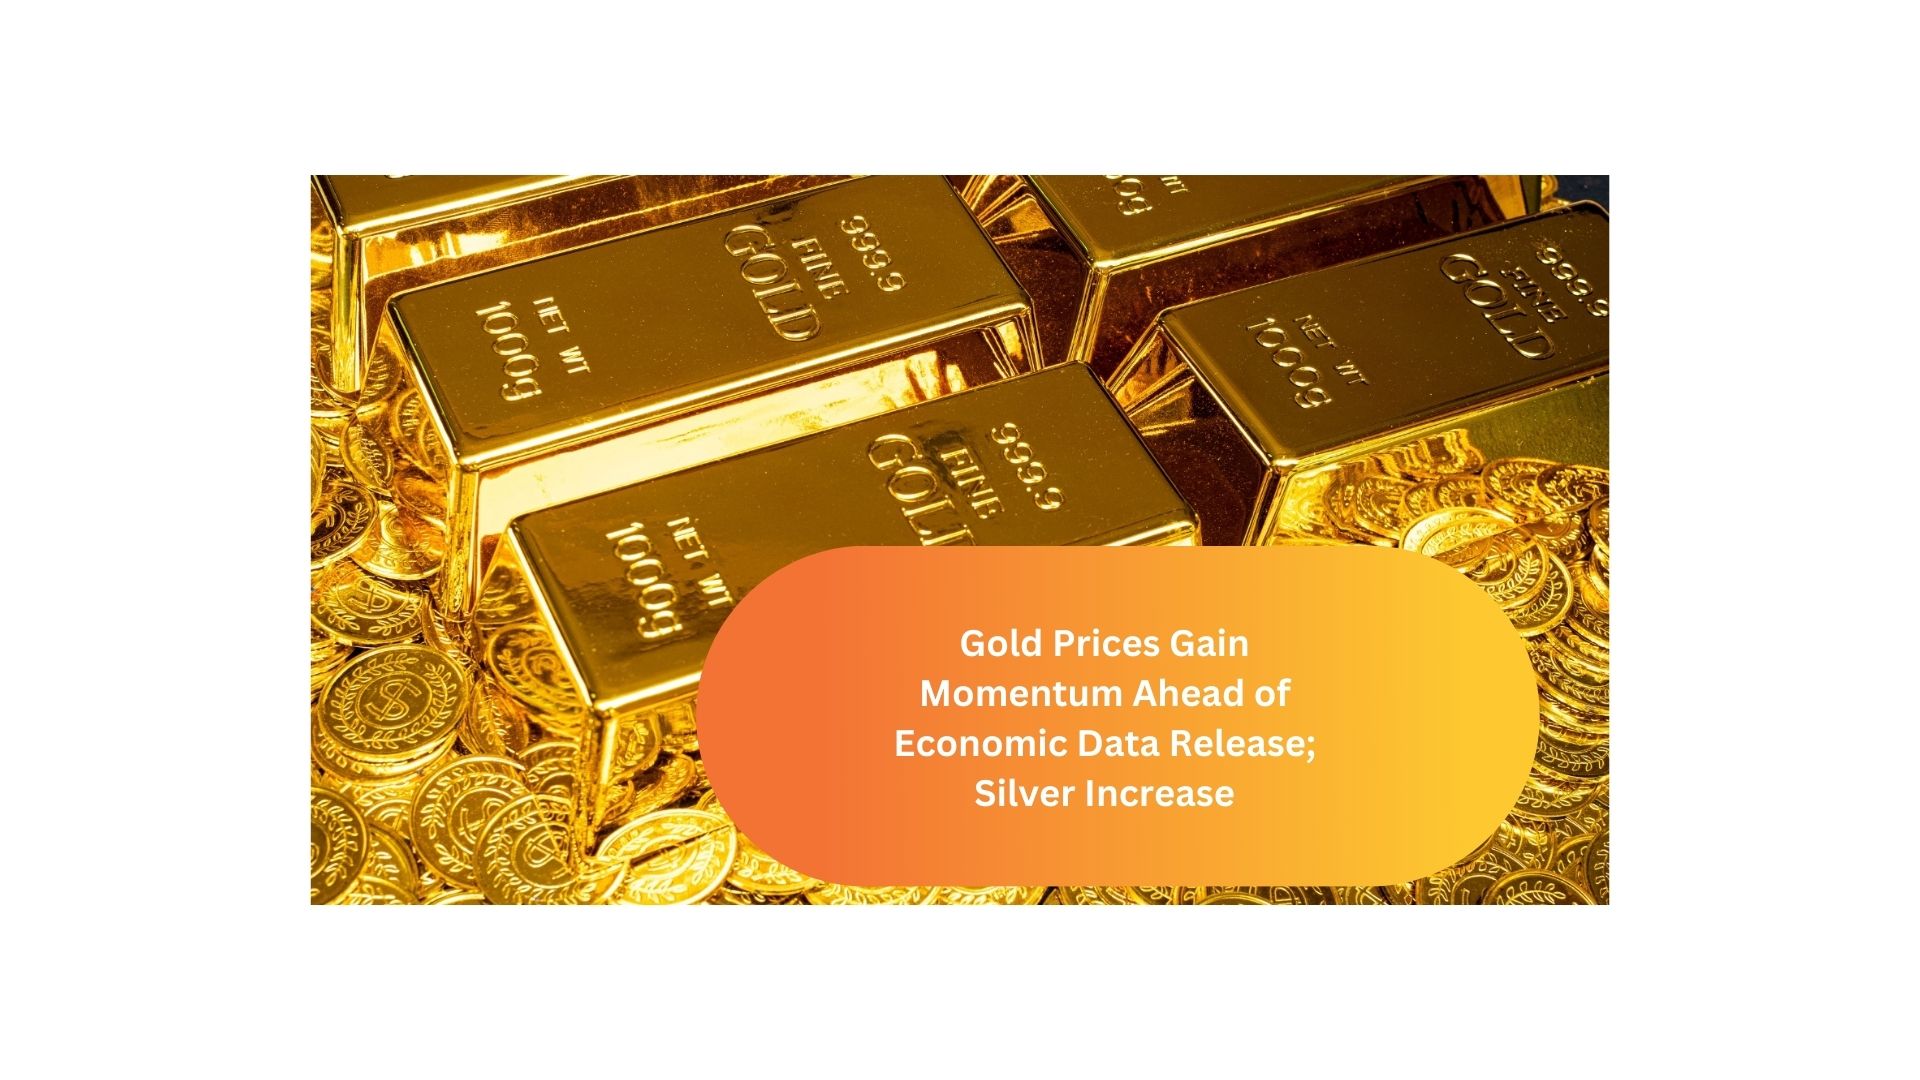 Gold Prices Gain Momentum Ahead of Economic Data Release; Silver Increase